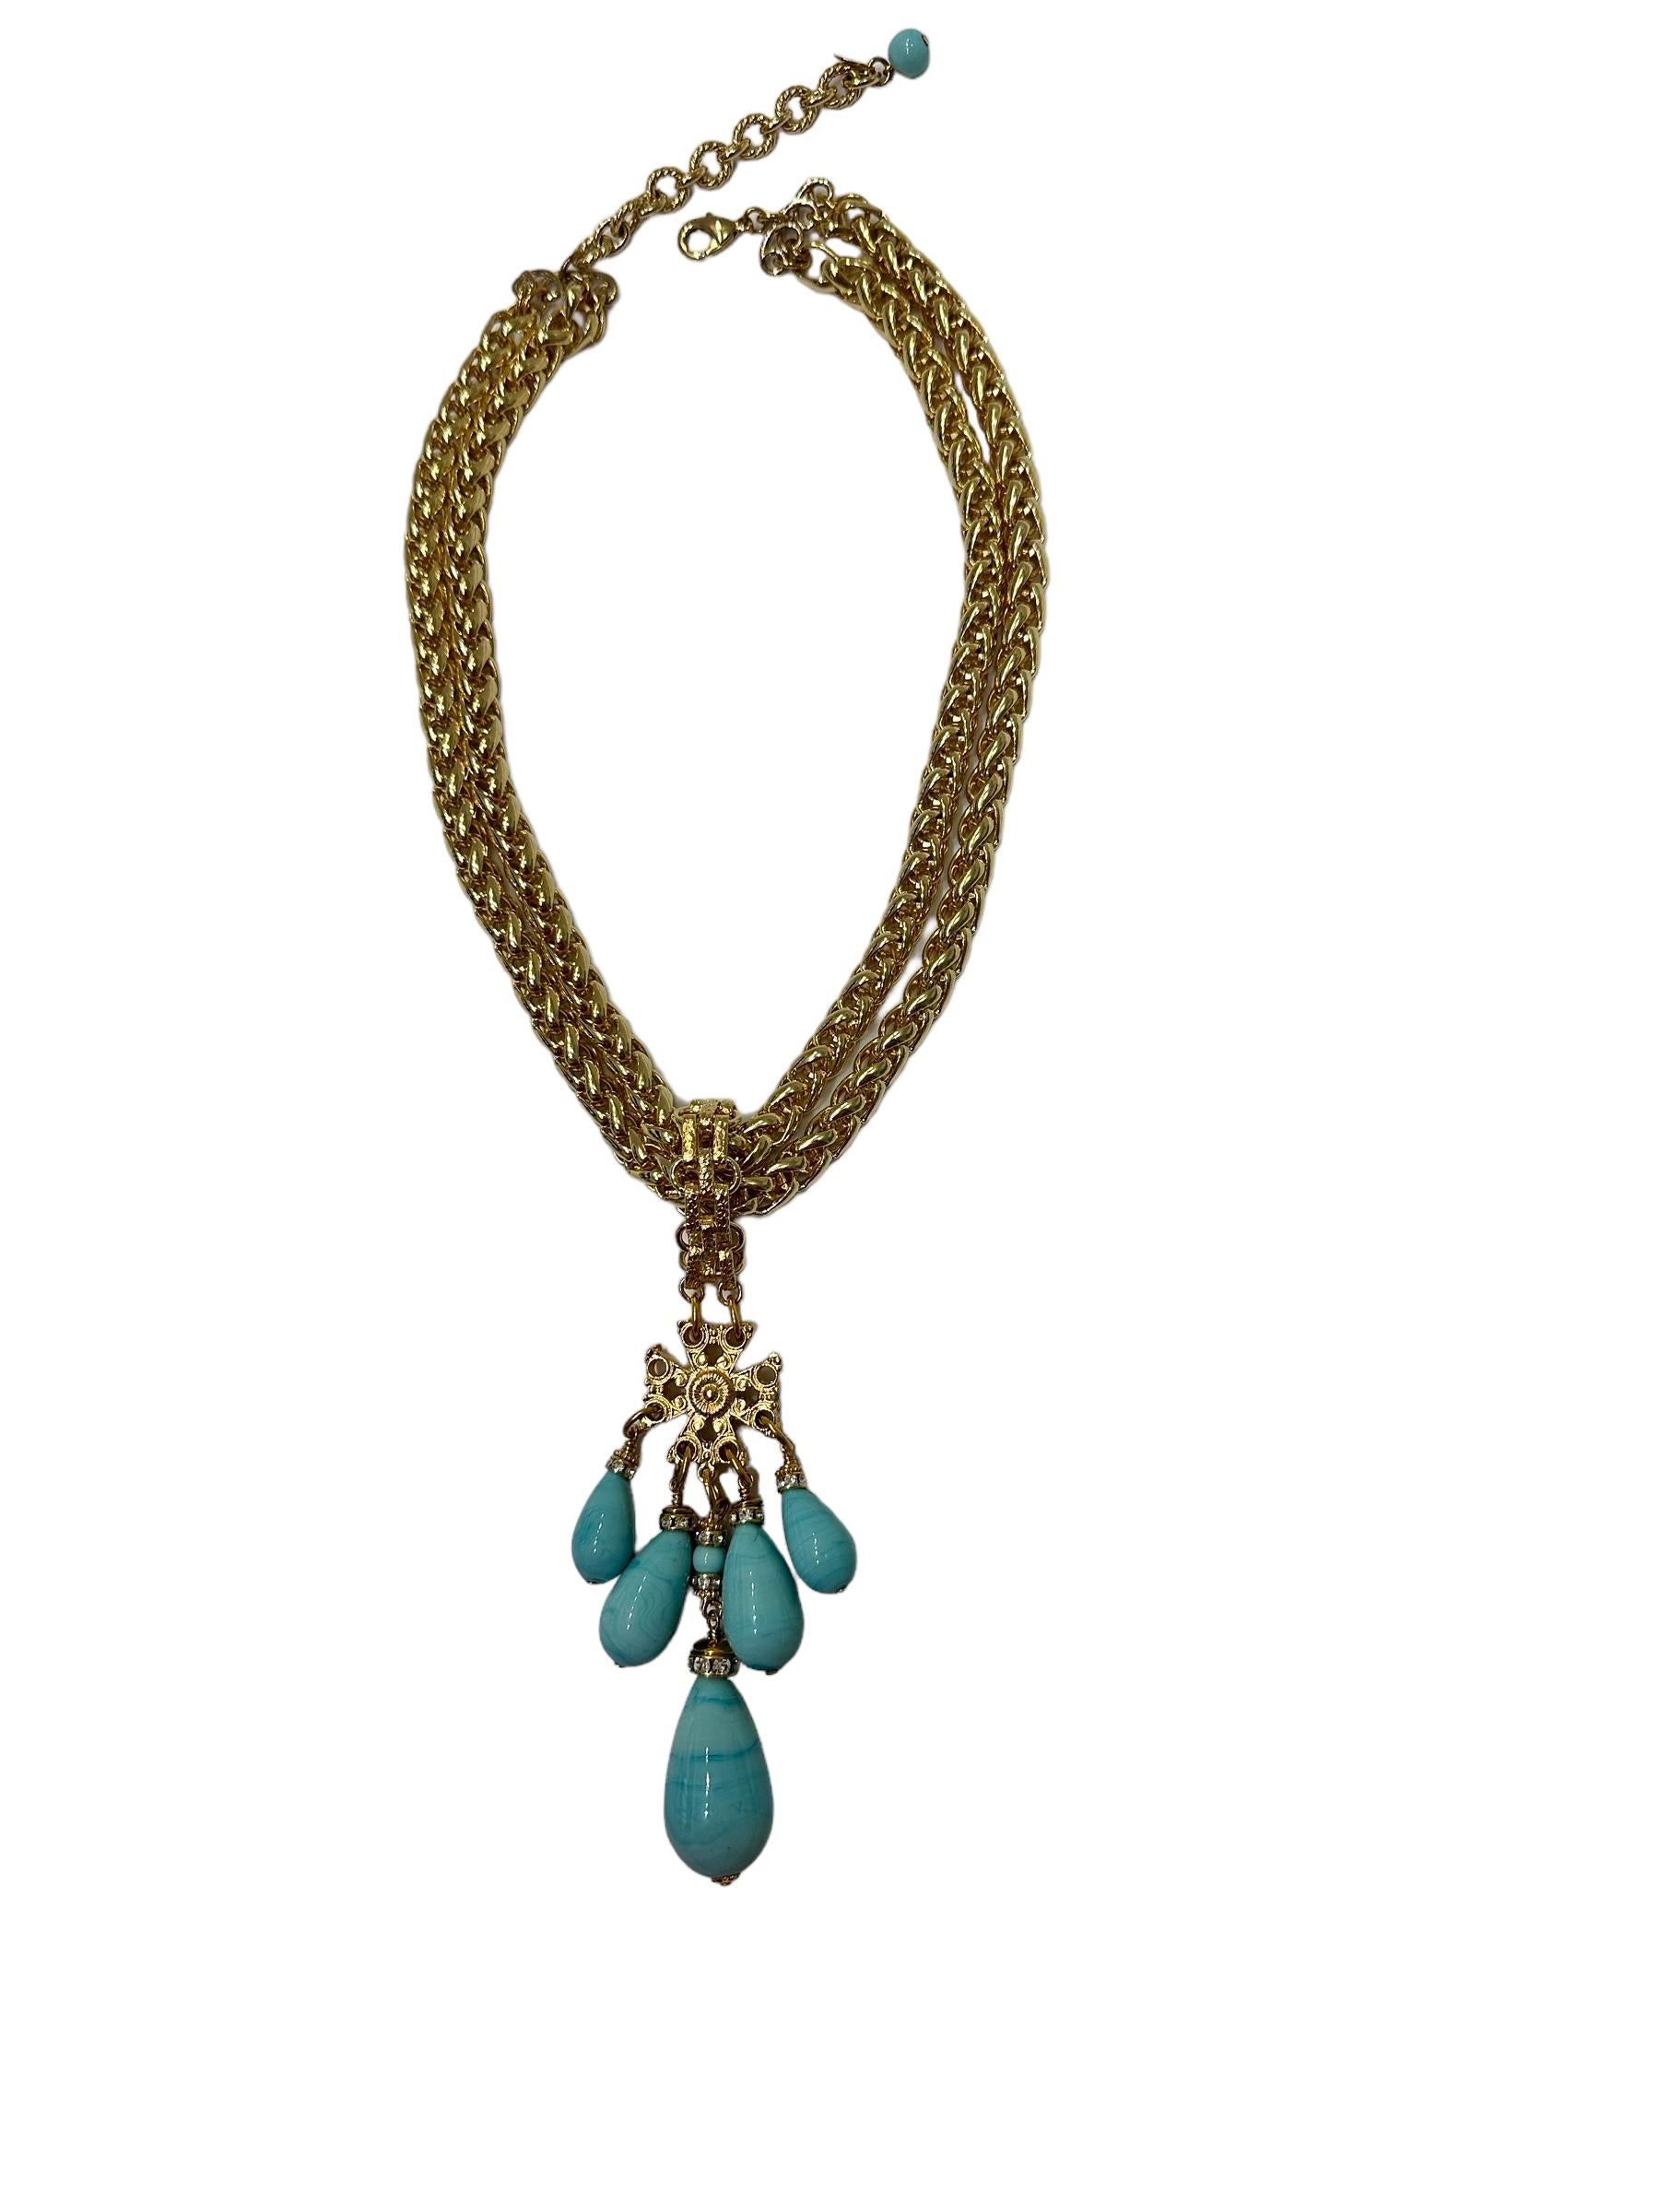 Françoise Montague Limited Série Gold Chain with Turquoise Pate De Verre  In New Condition For Sale In Virginia Beach, VA